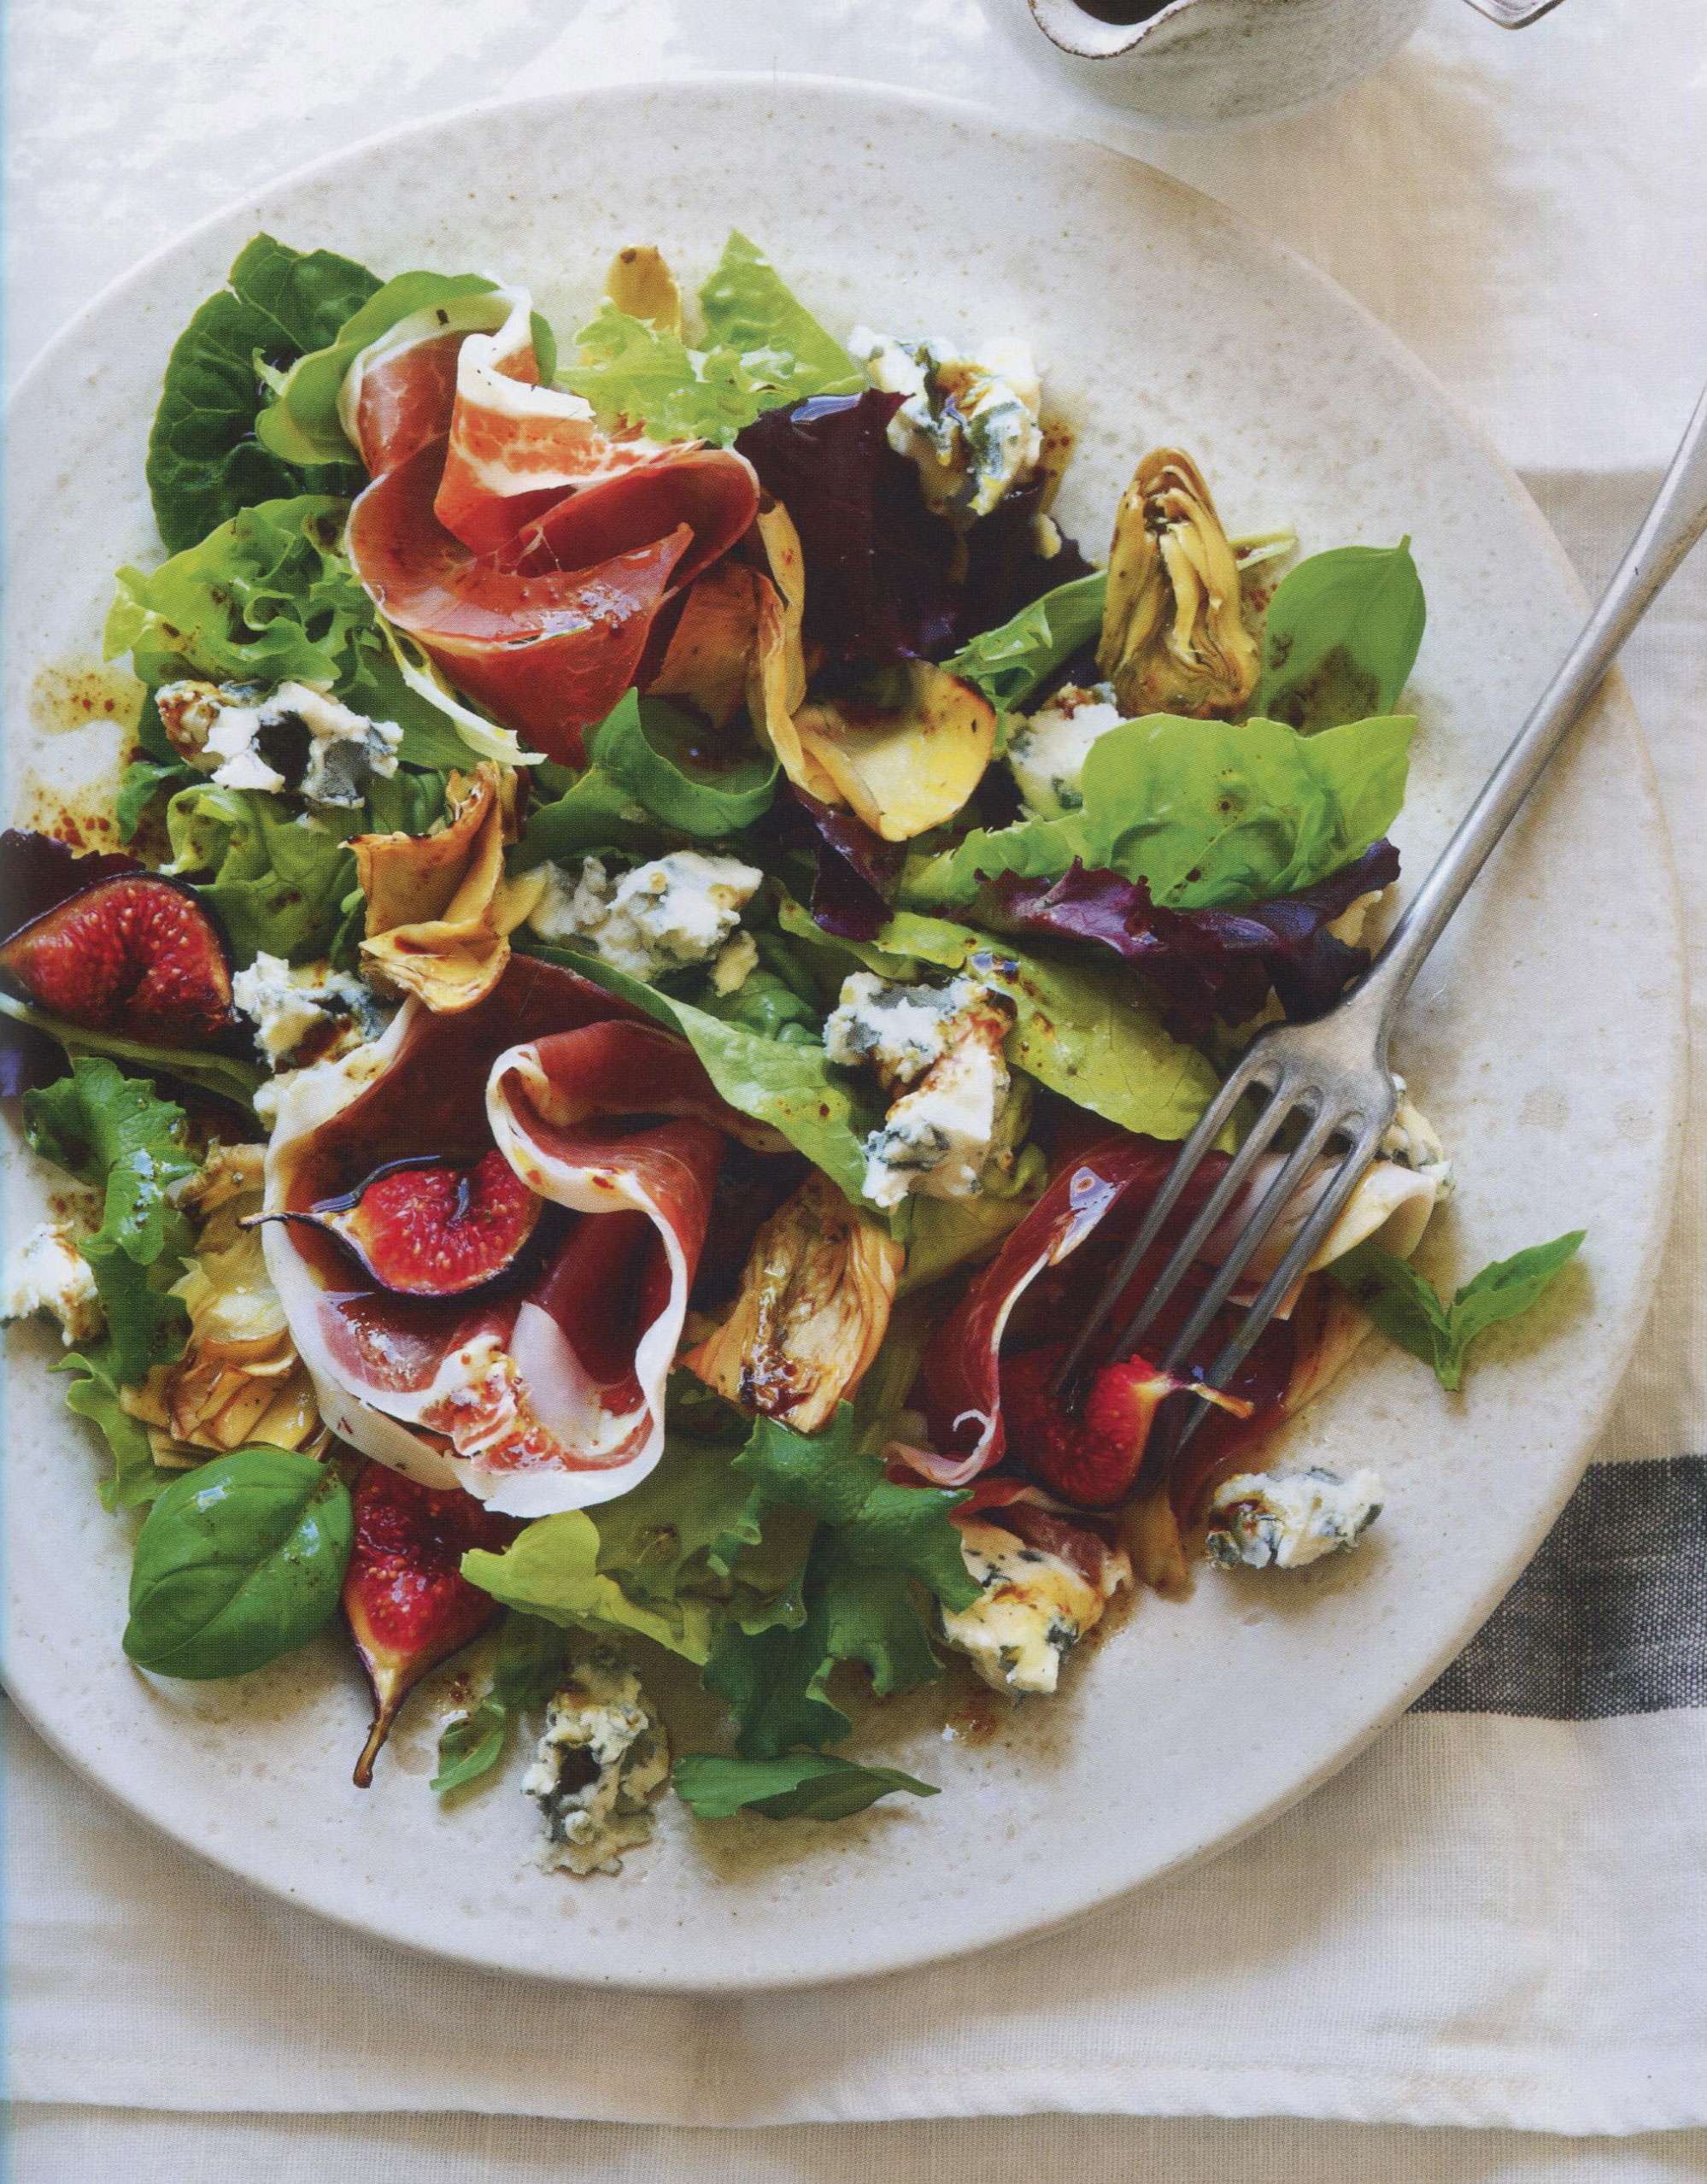 TBT Recipe: Prosciutto, Artichoke, Fig and Roquefort Salad with Balsamic Dressing